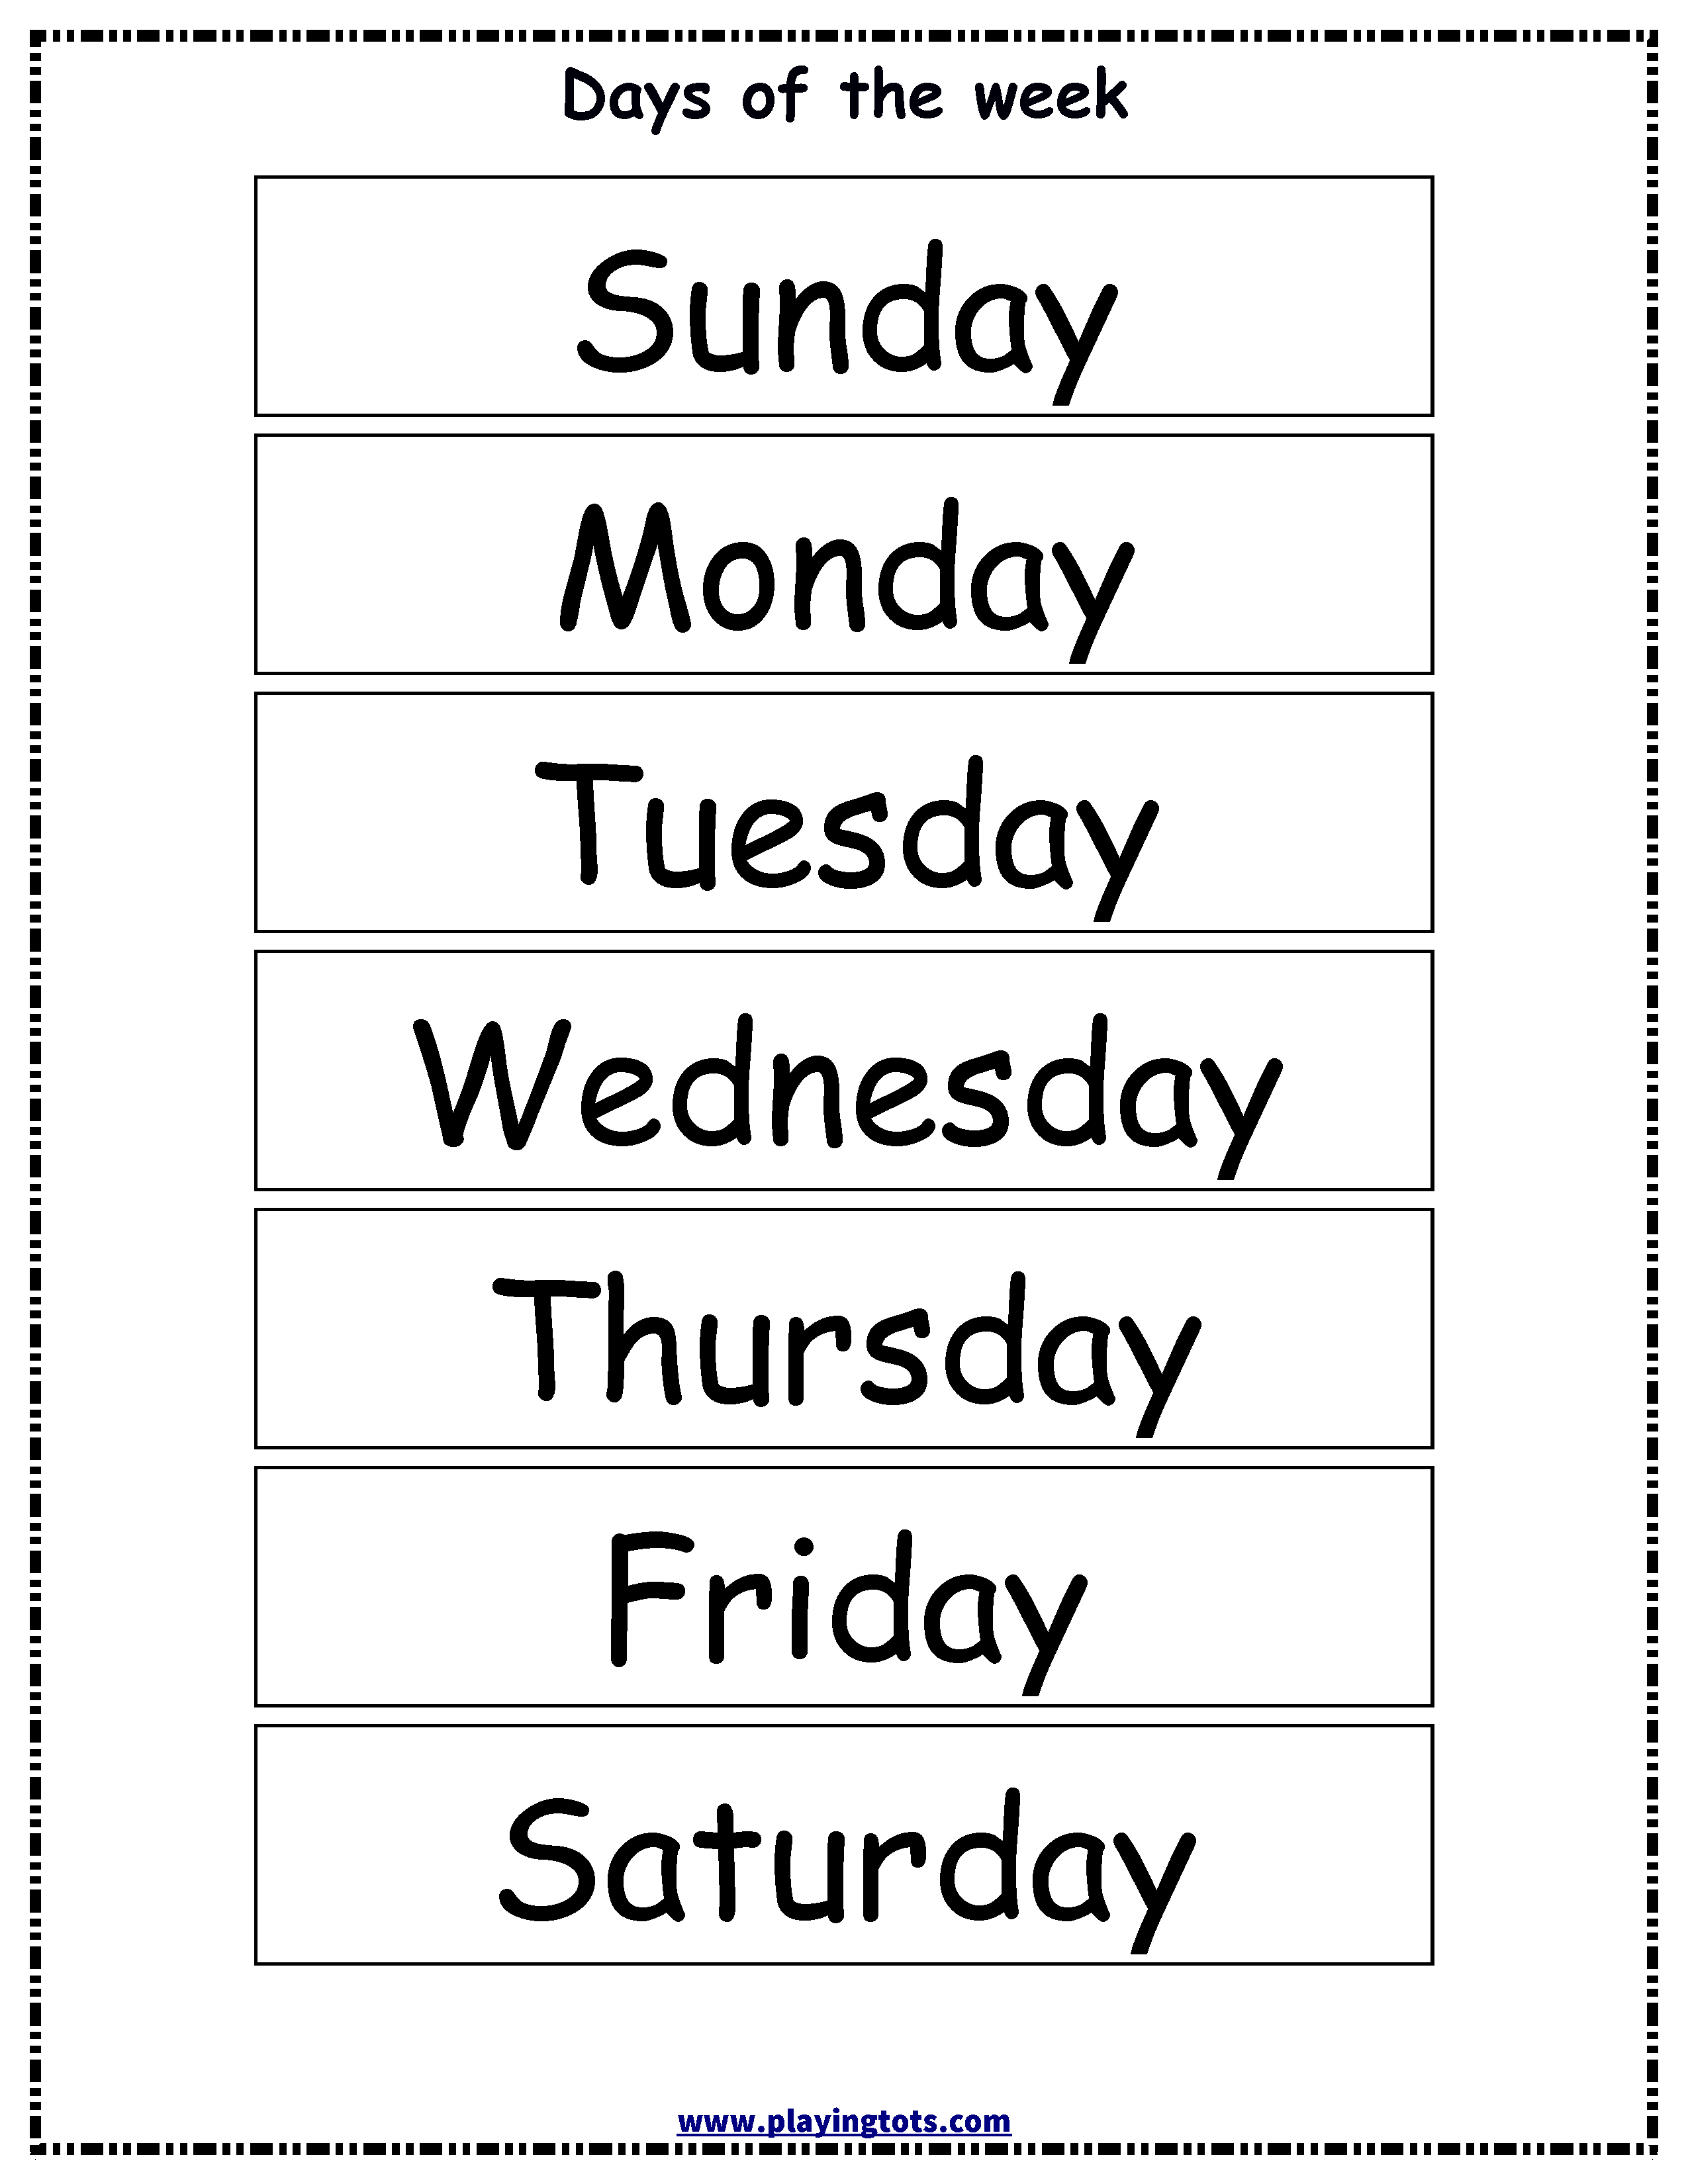 Free Printable Days Of The Week Chart | Classroom Ideas | Flashcards - Free Printable Days Of The Week